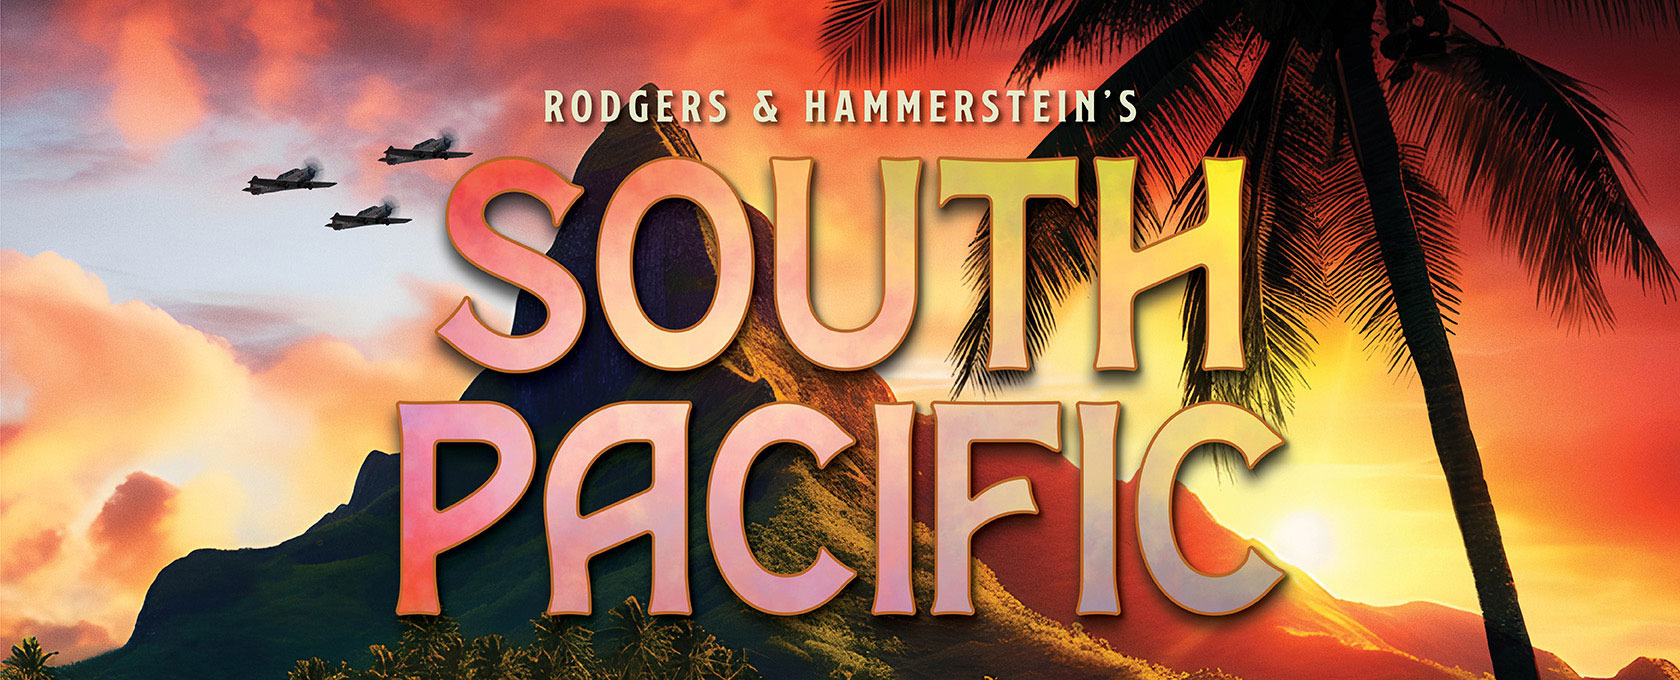 south pacific poster